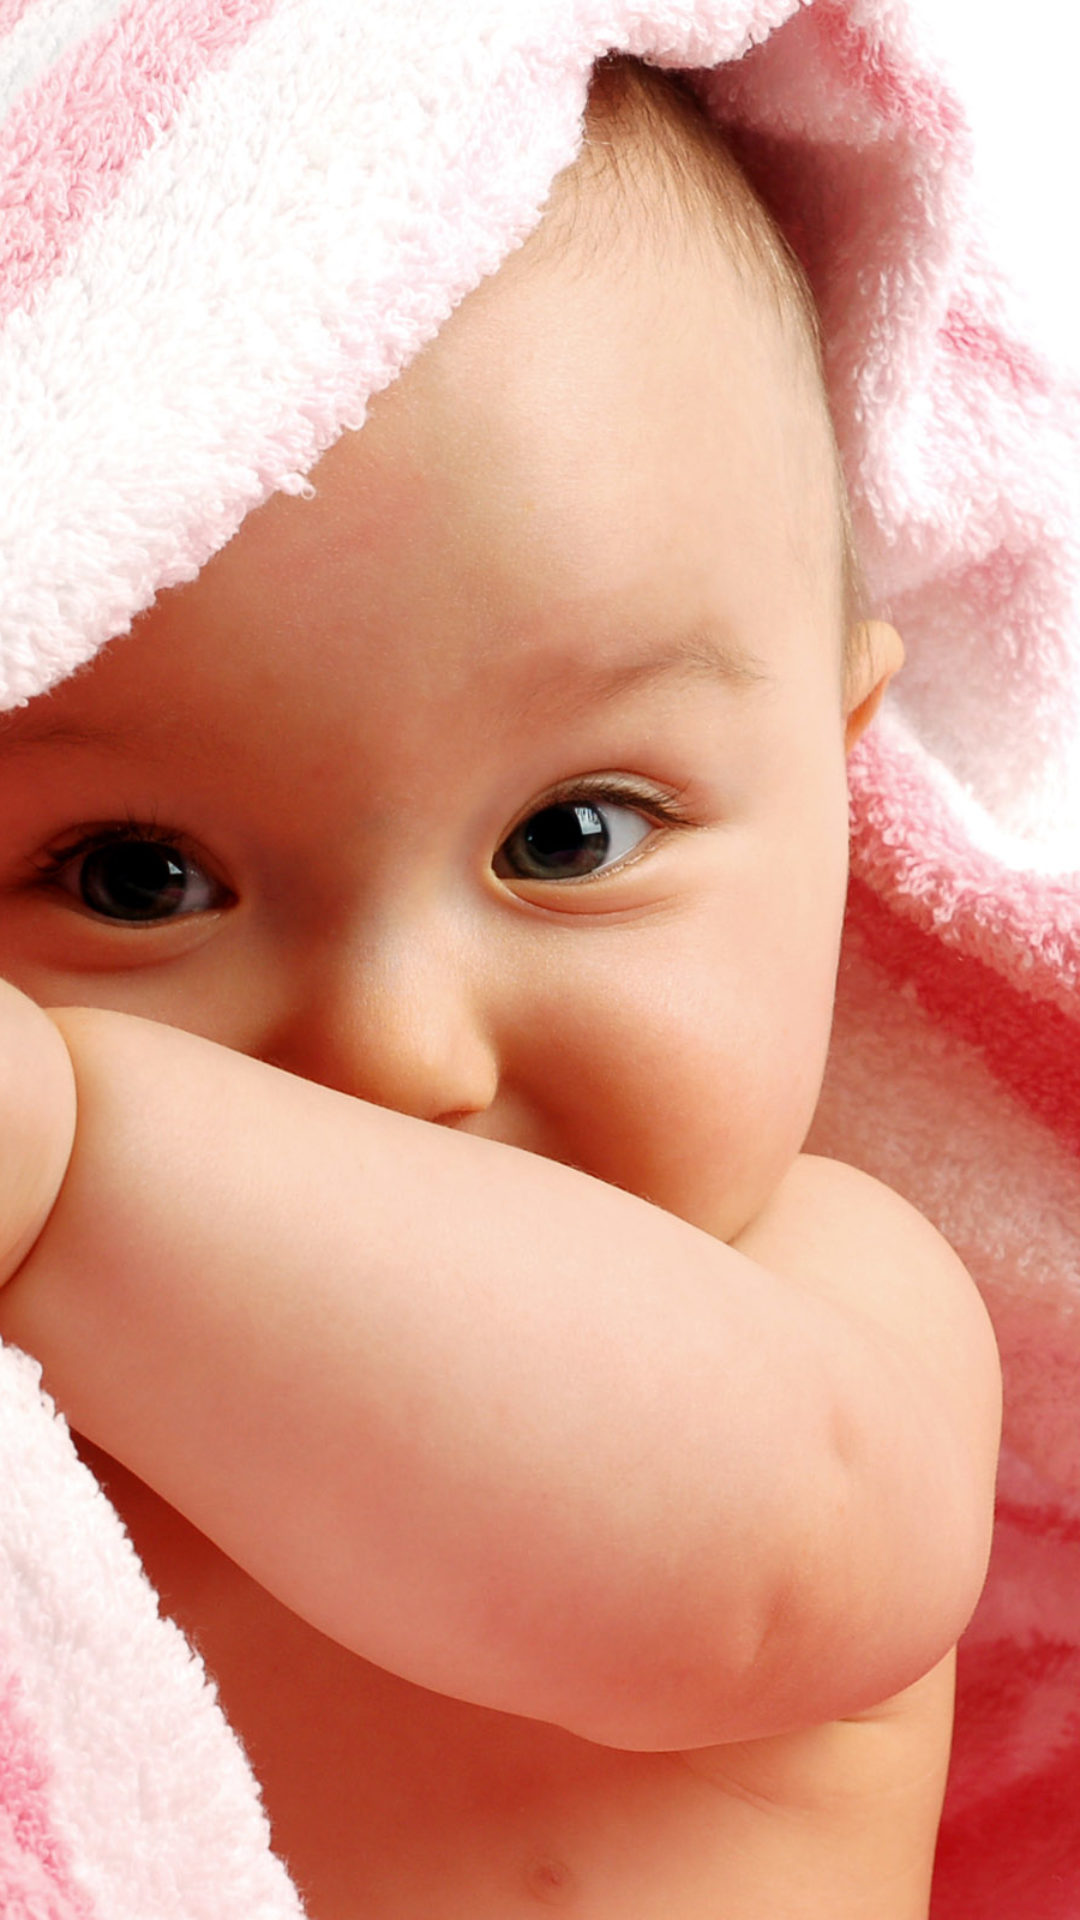 baby wallpaper hd download,child,baby,face,skin,nose